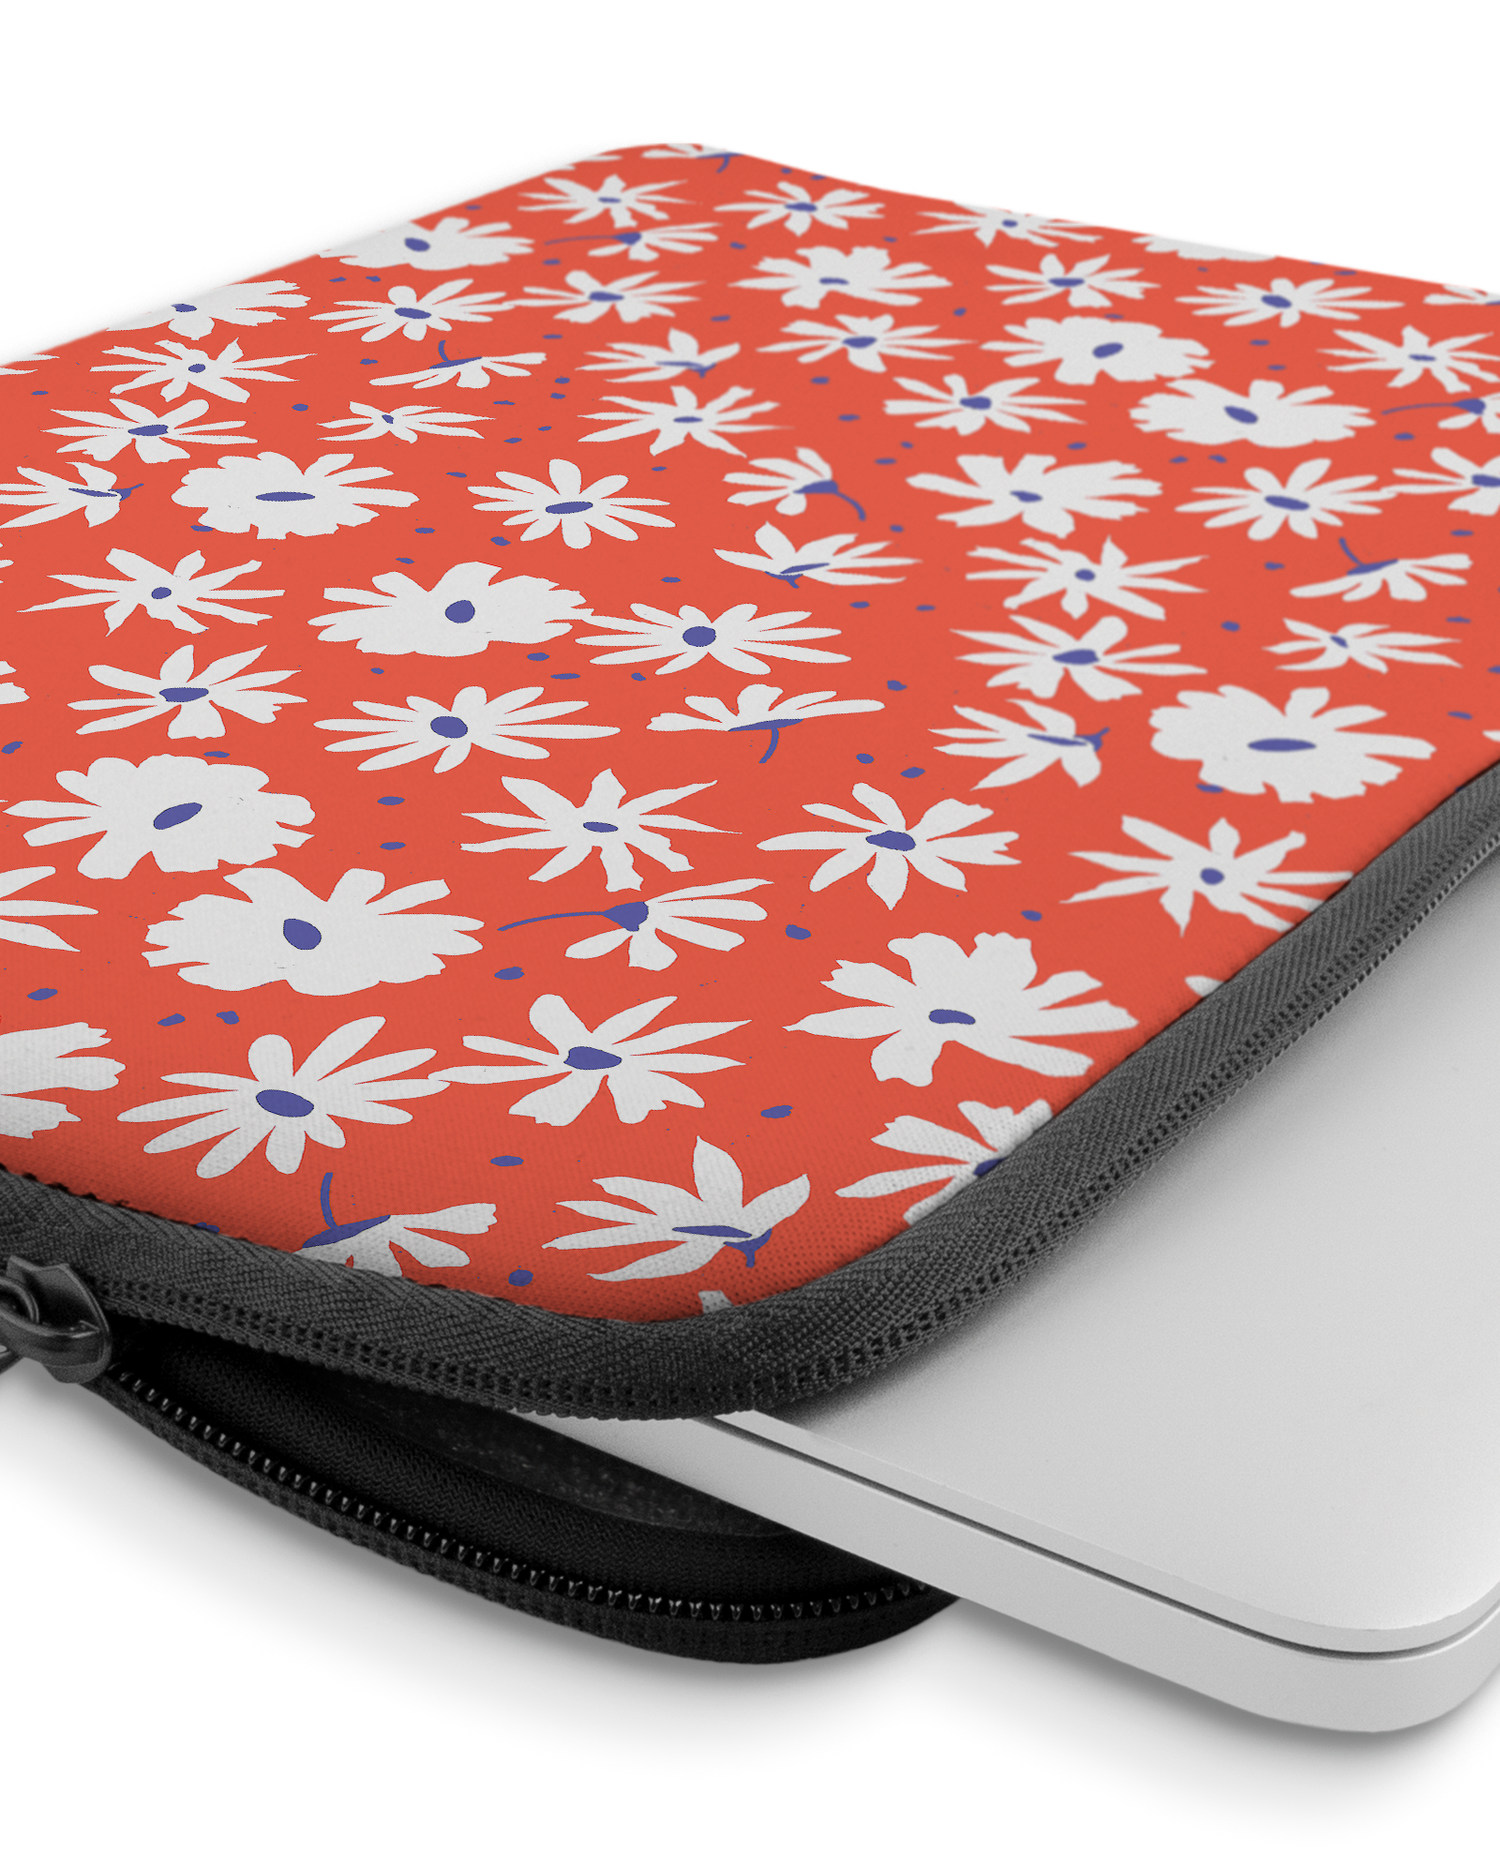 Retro Daisy Laptop Case 13-14 inch with device inside